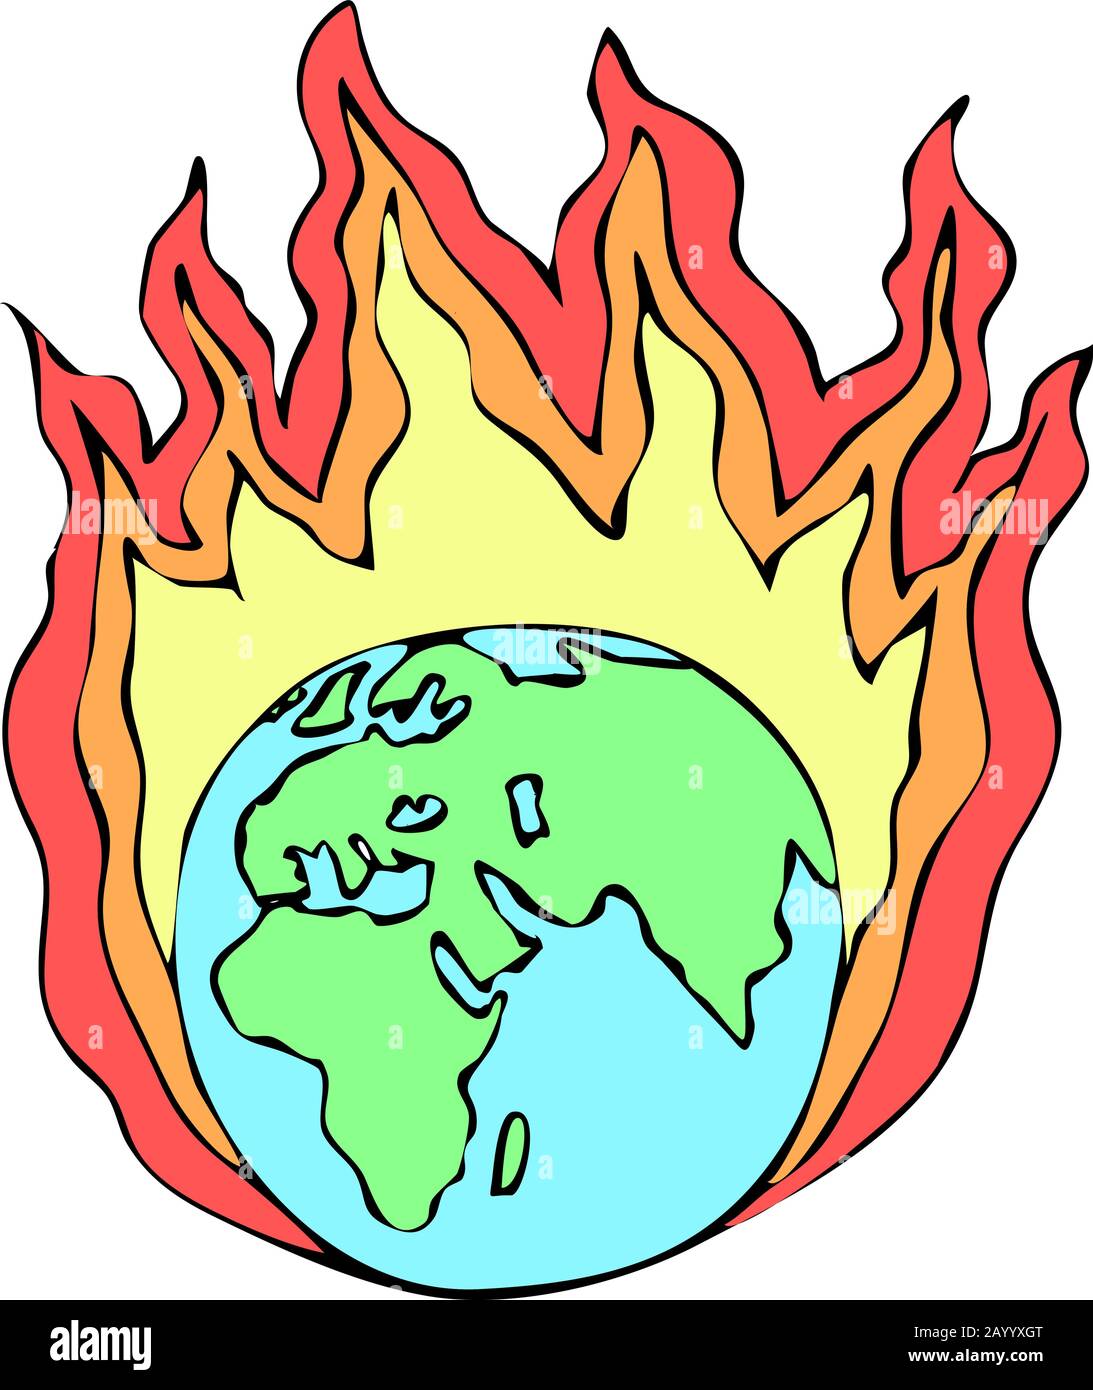 The Earth on fire: vector illustration for climate change/global warming disaster Stock Vector